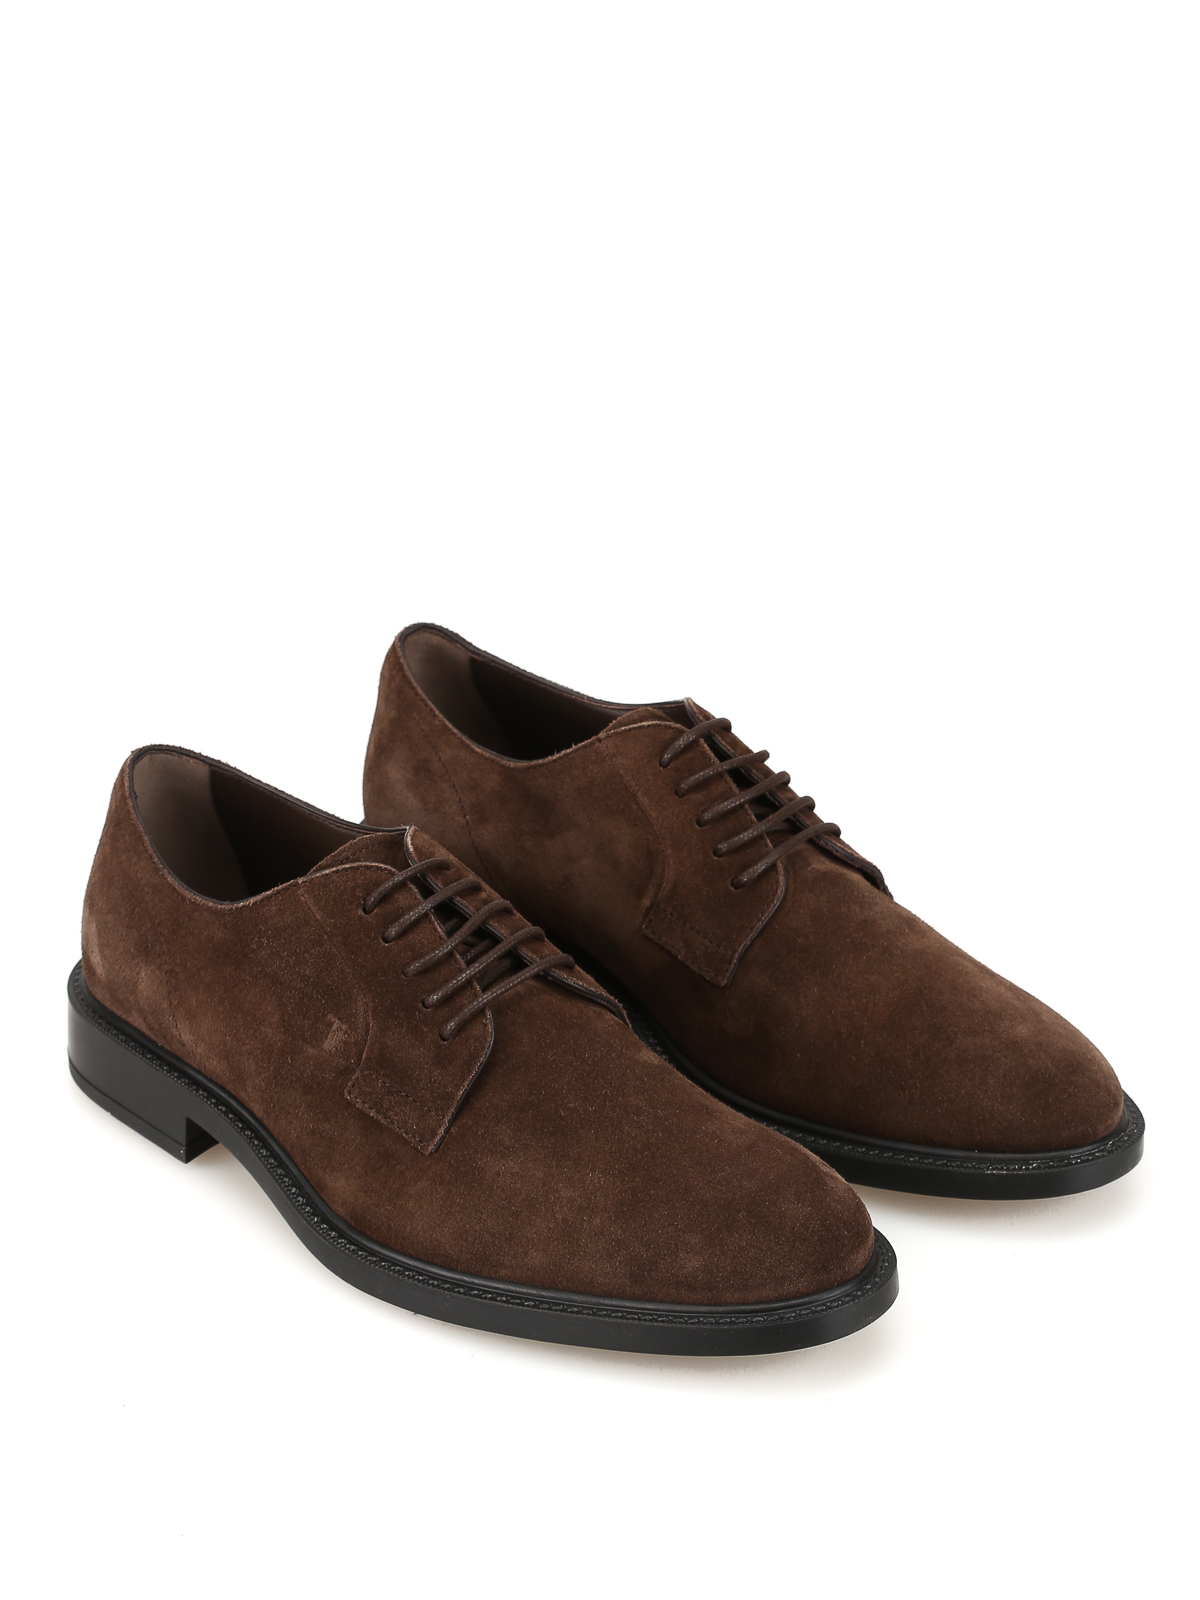 Tods Suede Lace-up Shoes in Camel Brown for Men Mens Shoes Lace-ups Brogues 